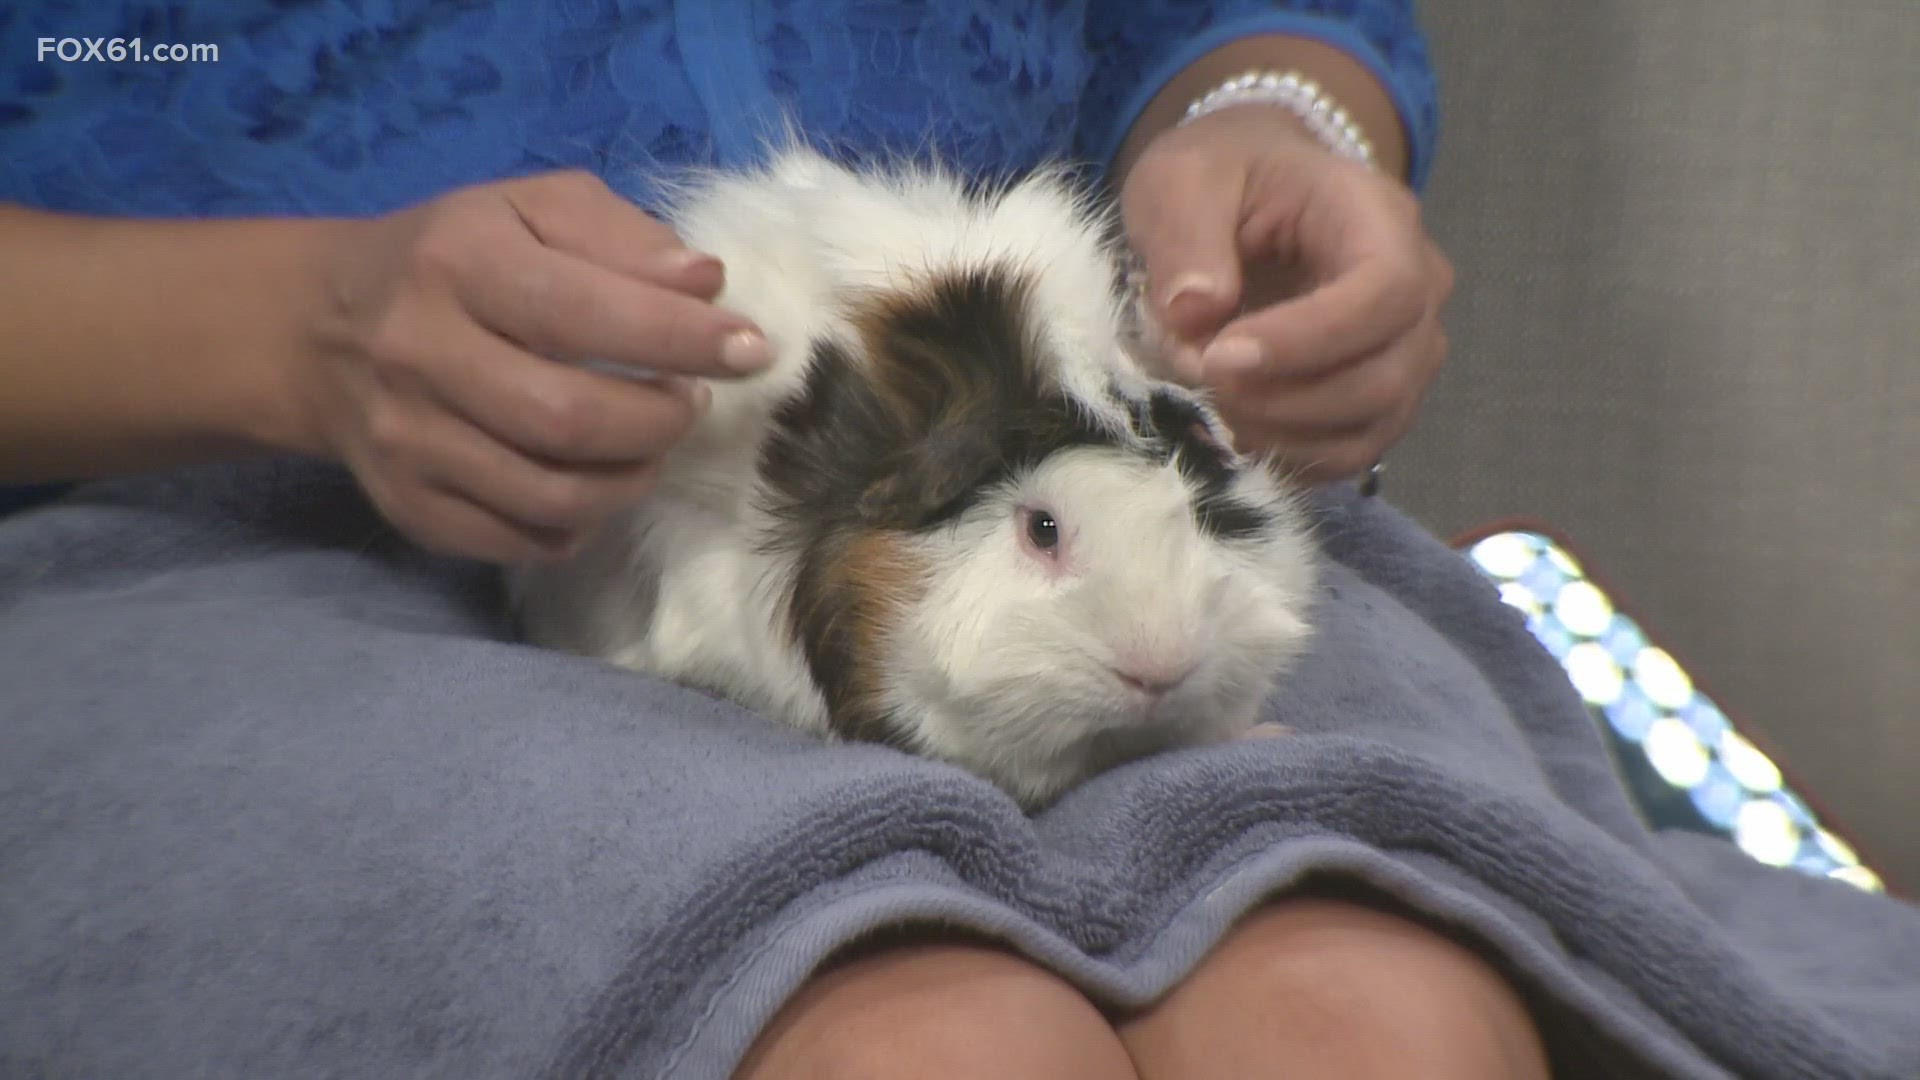 Meet Laszlo, a 7 month old Guinea pig! He's looking for his forever home during his stay at the Connecticut Humane Society.